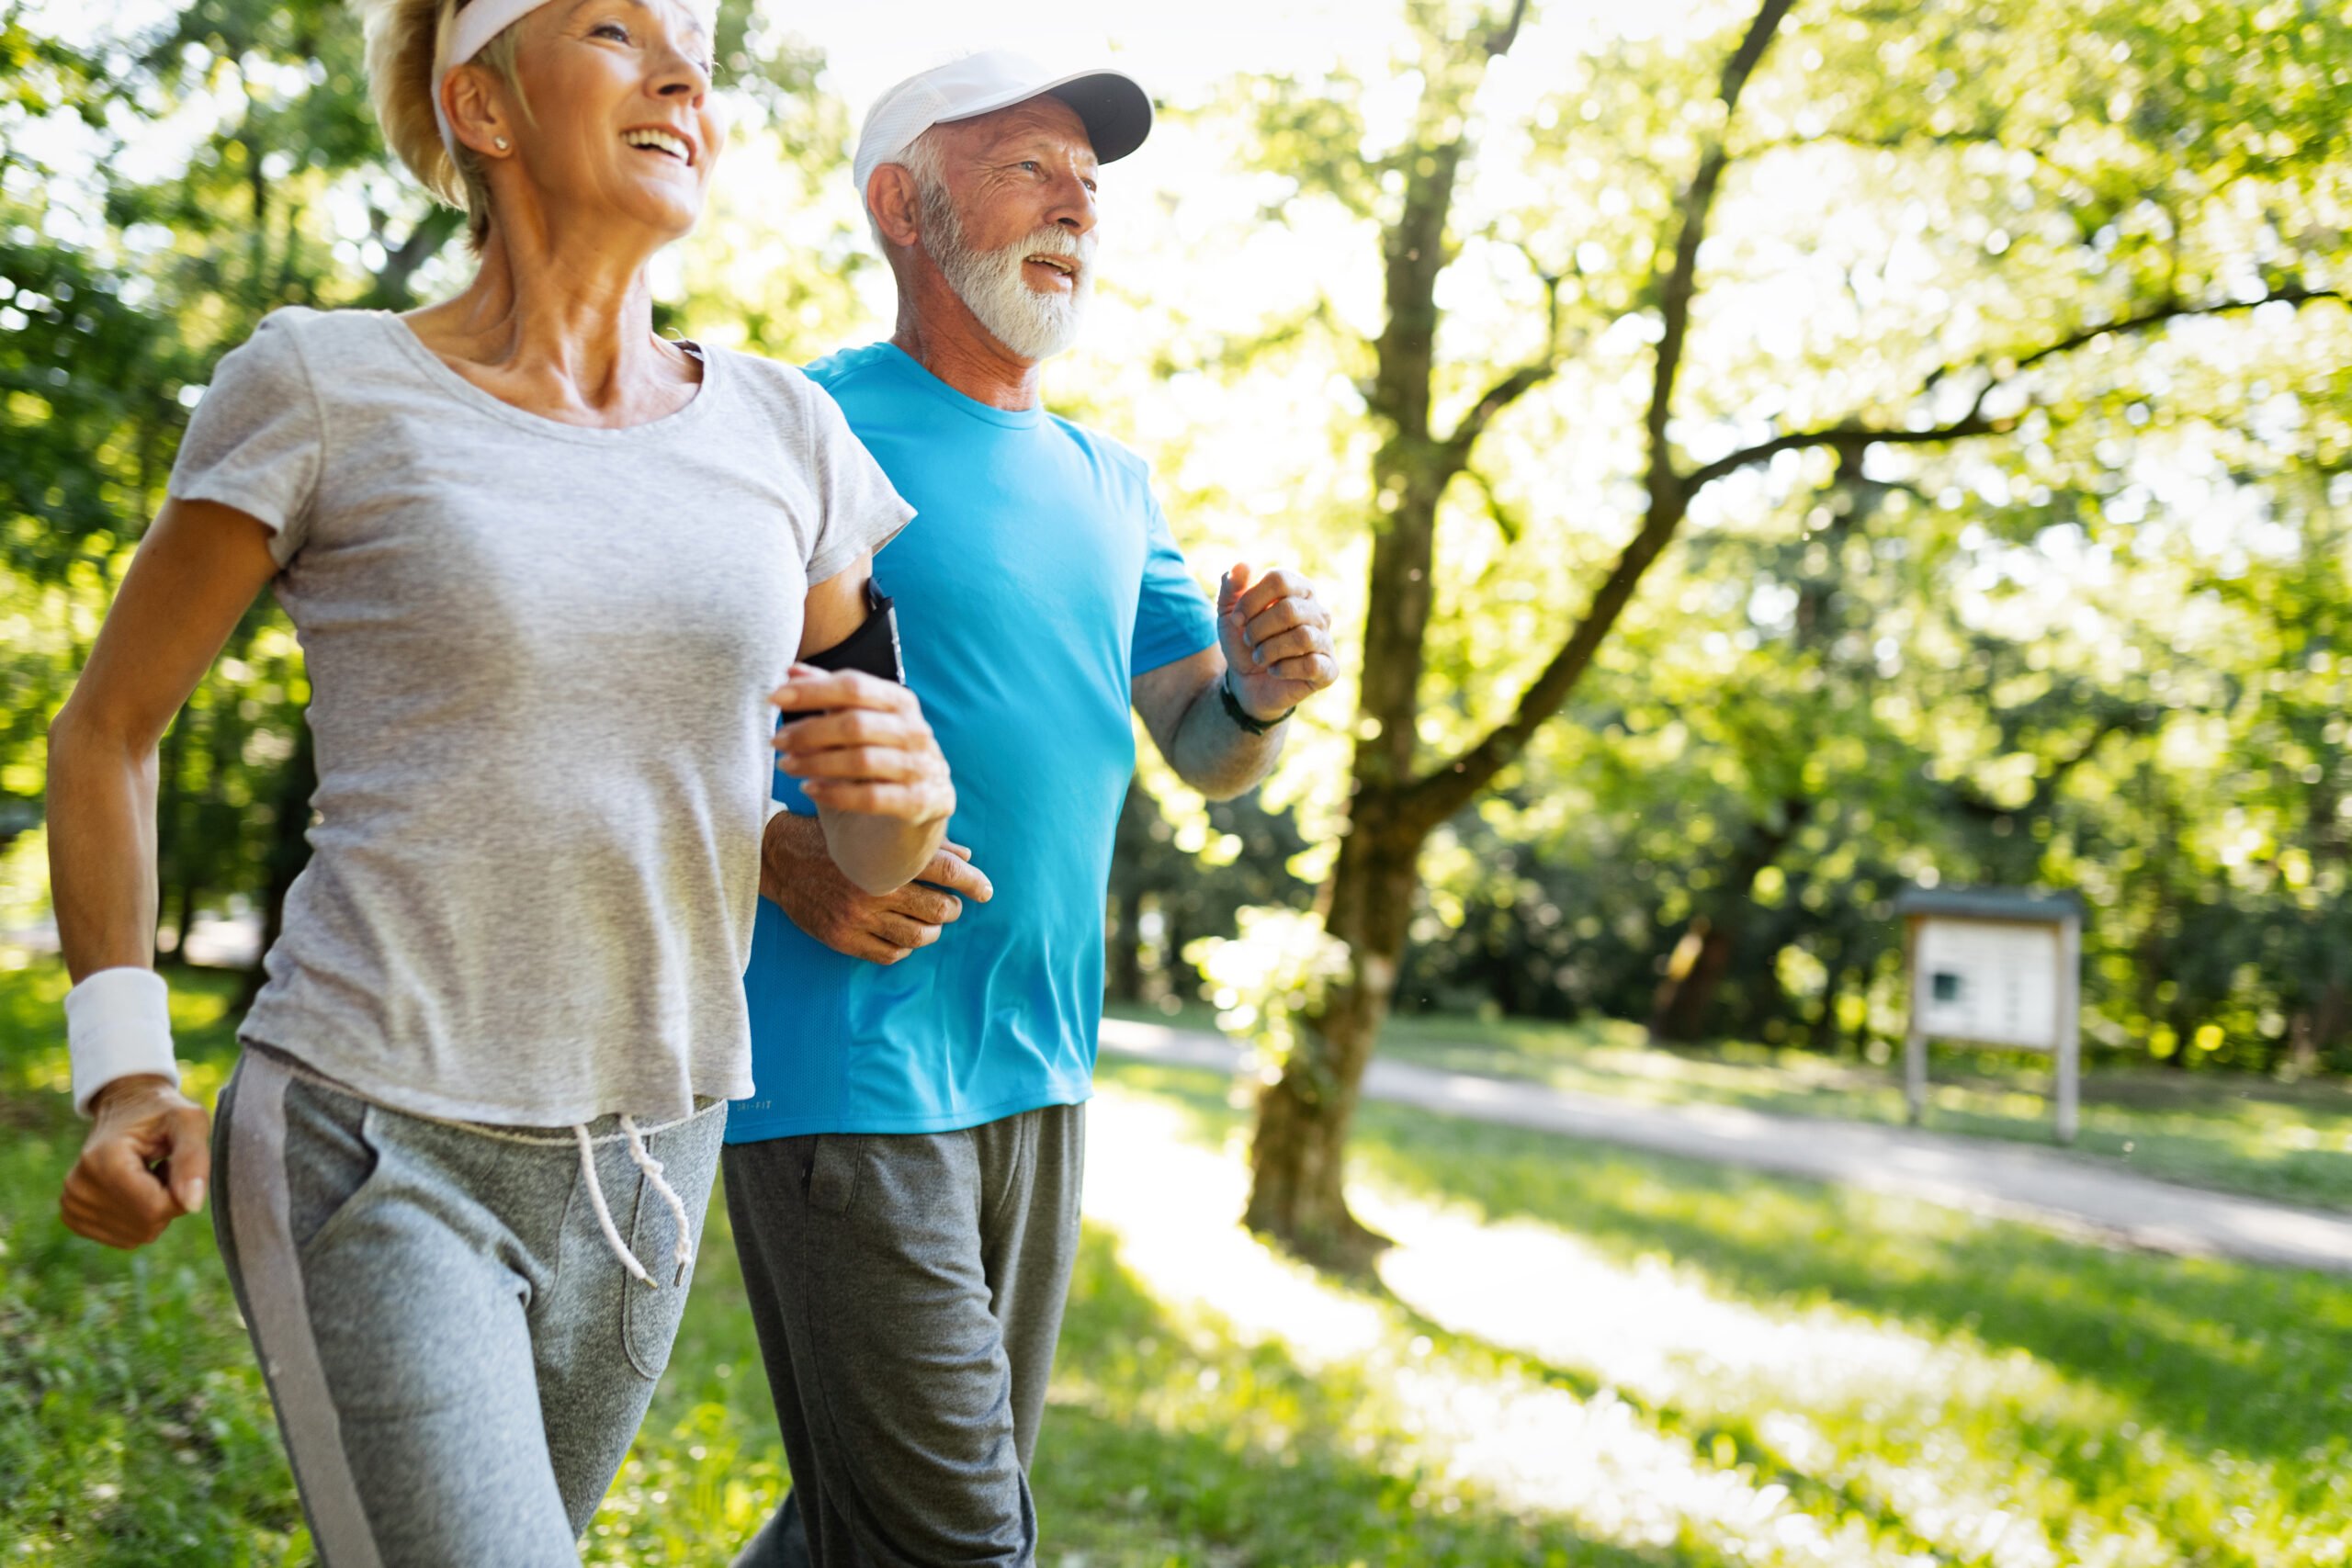 You are currently viewing Anti-Aging Activities: Walking